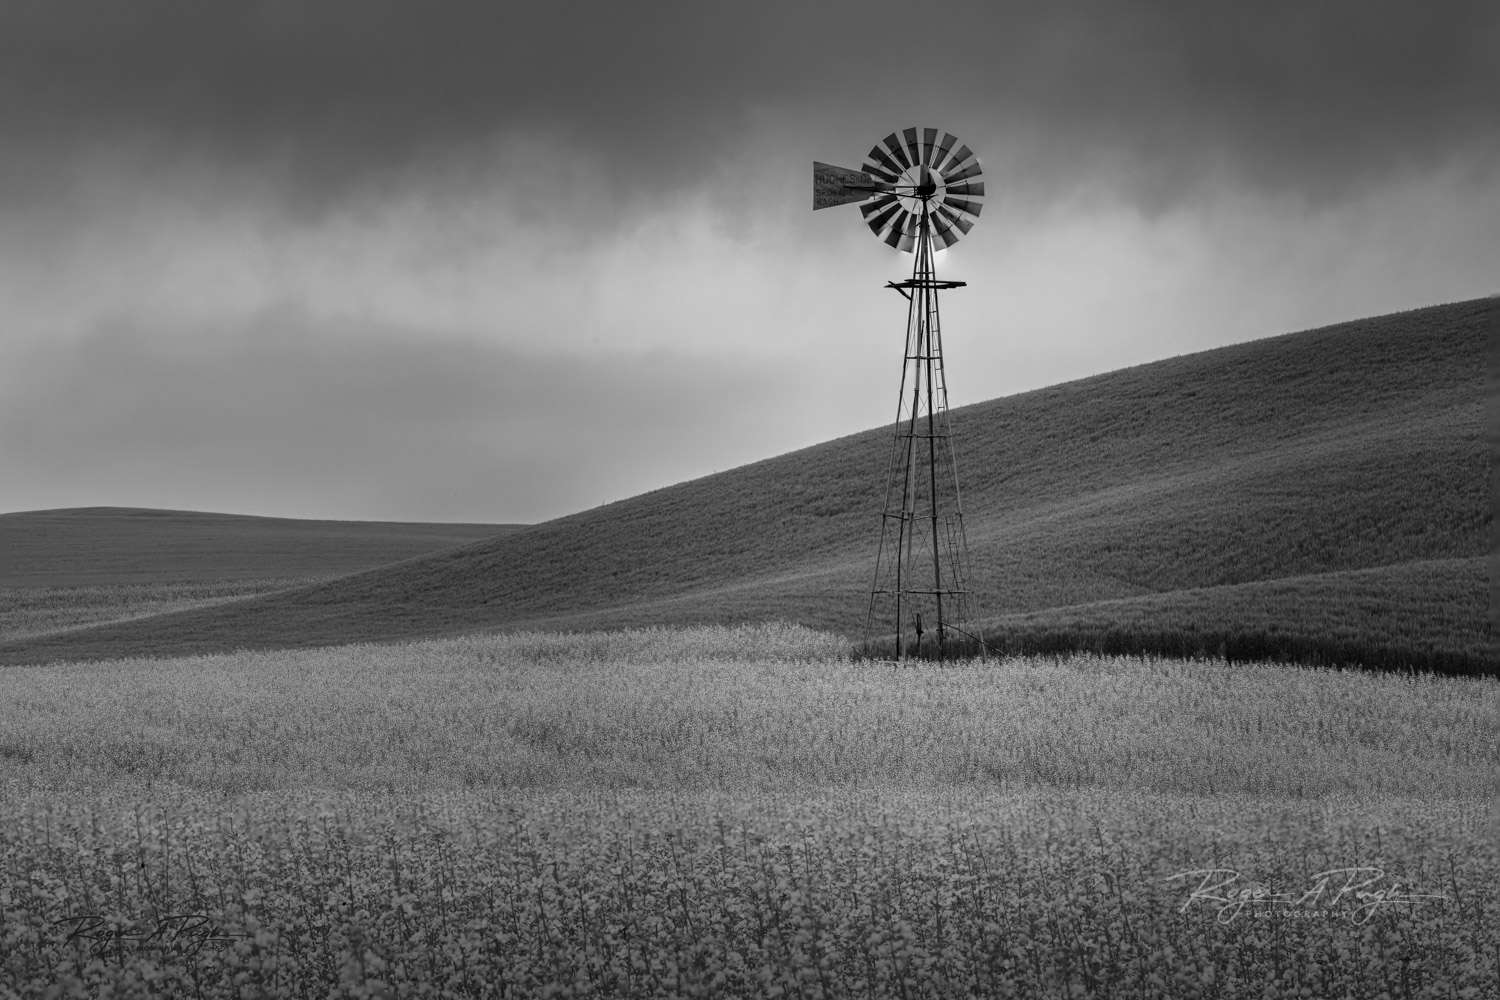 As I drove down a very dusty and bumpy dirt road in between the canola and wheat, this windmill appeared standing tall with a...